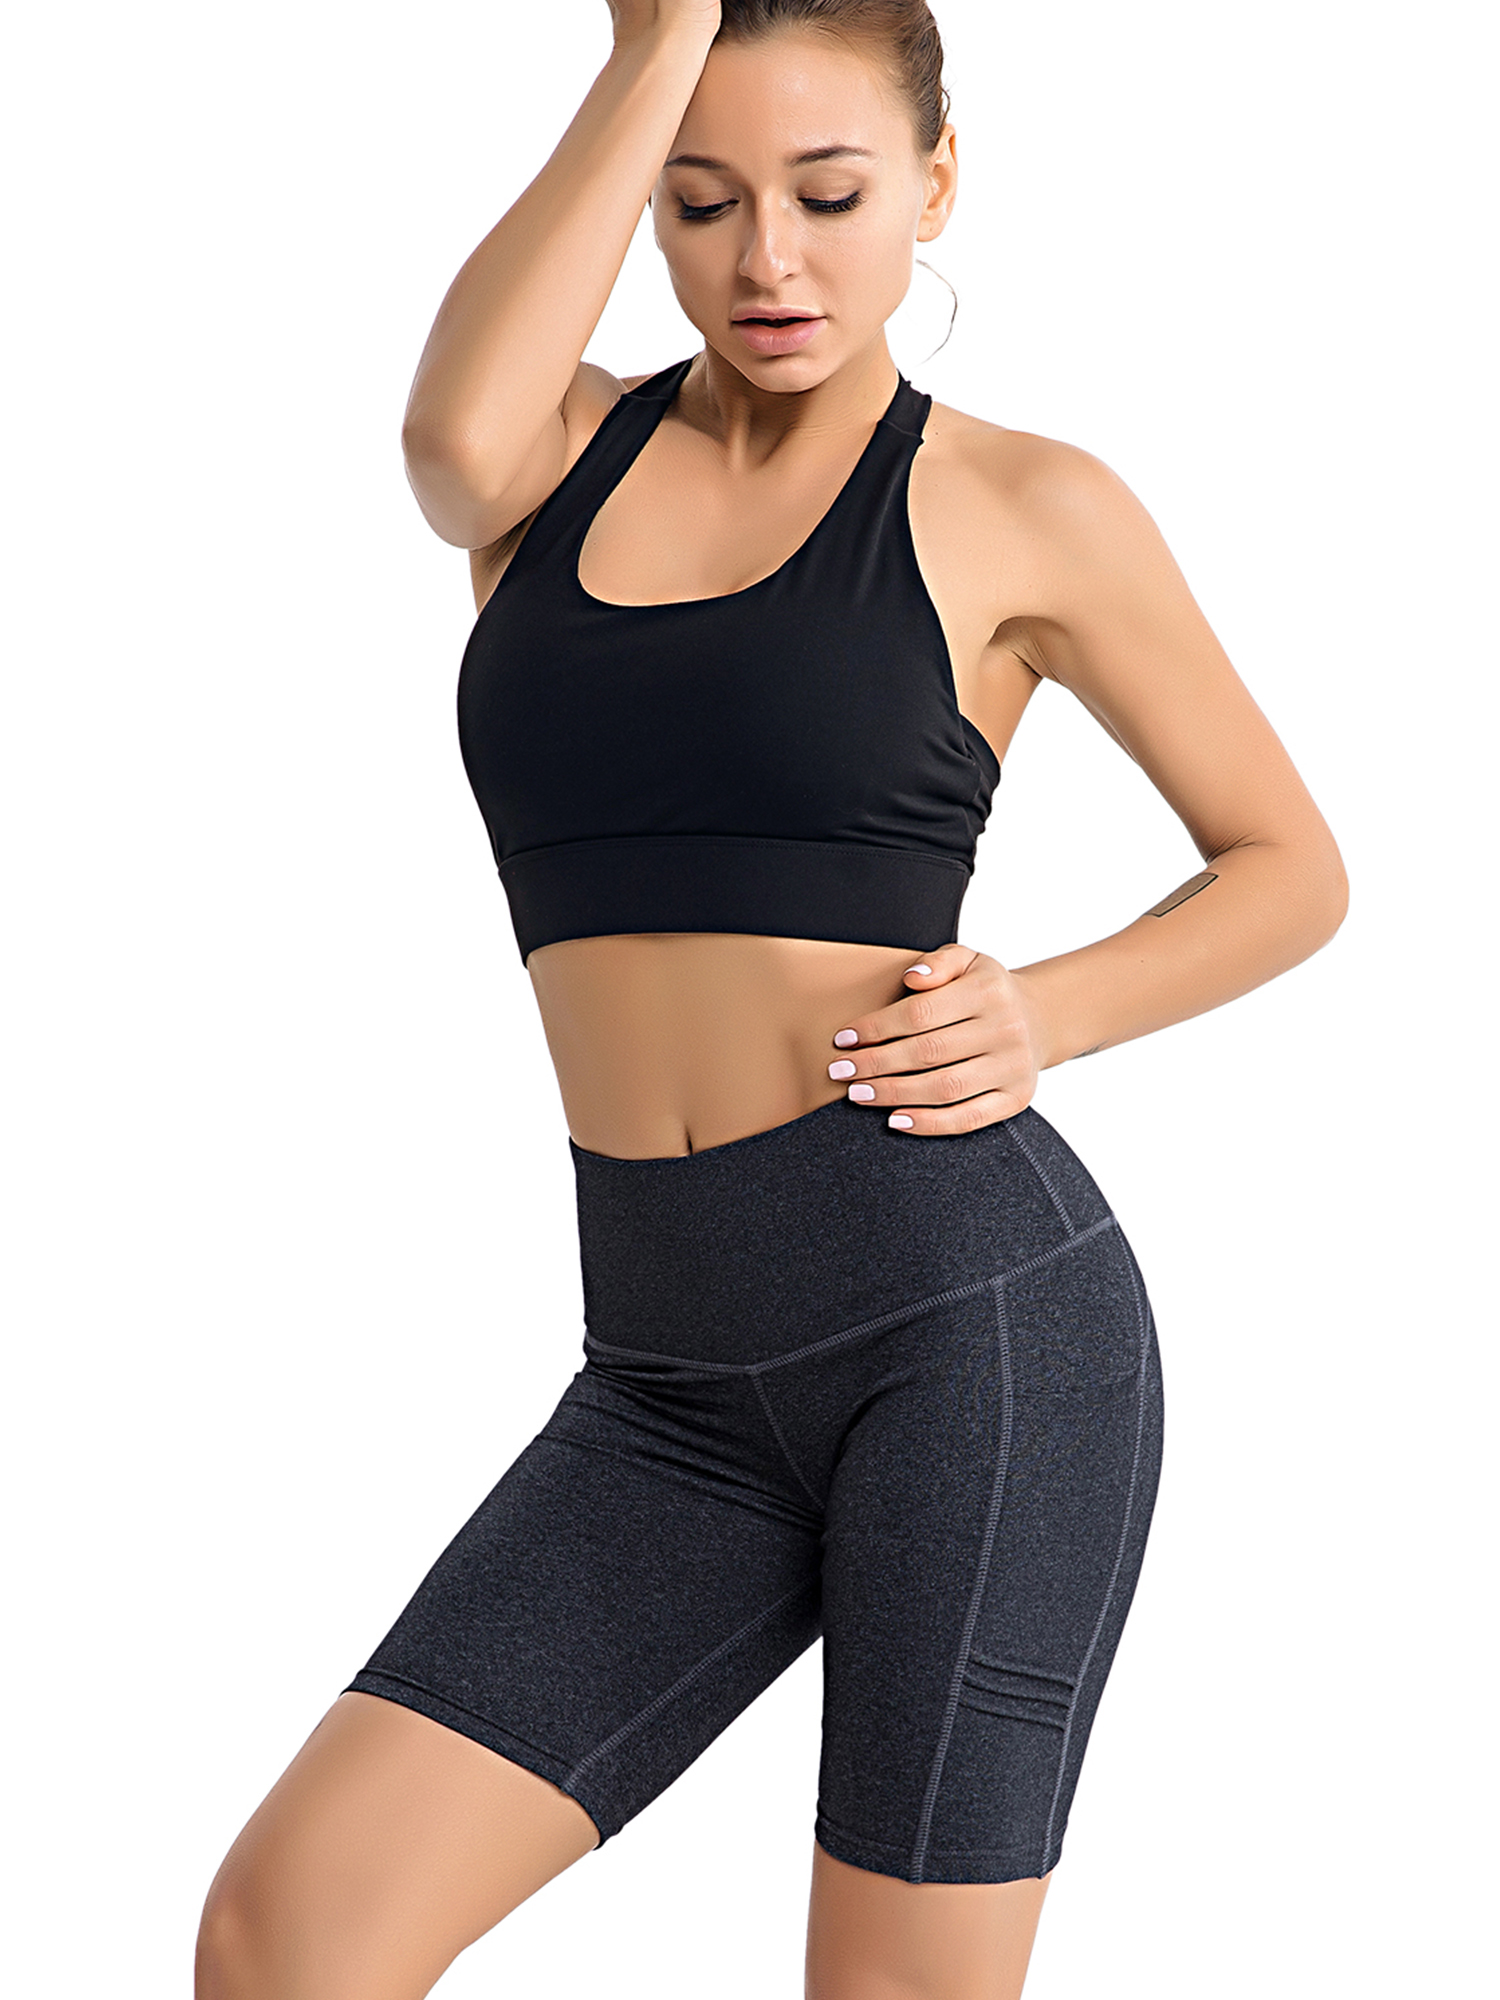 Tummy Control Yoga Shorts with Pockets for Women Workout Running Athletic Bike High Waist Activewear Bottoms - image 3 of 8